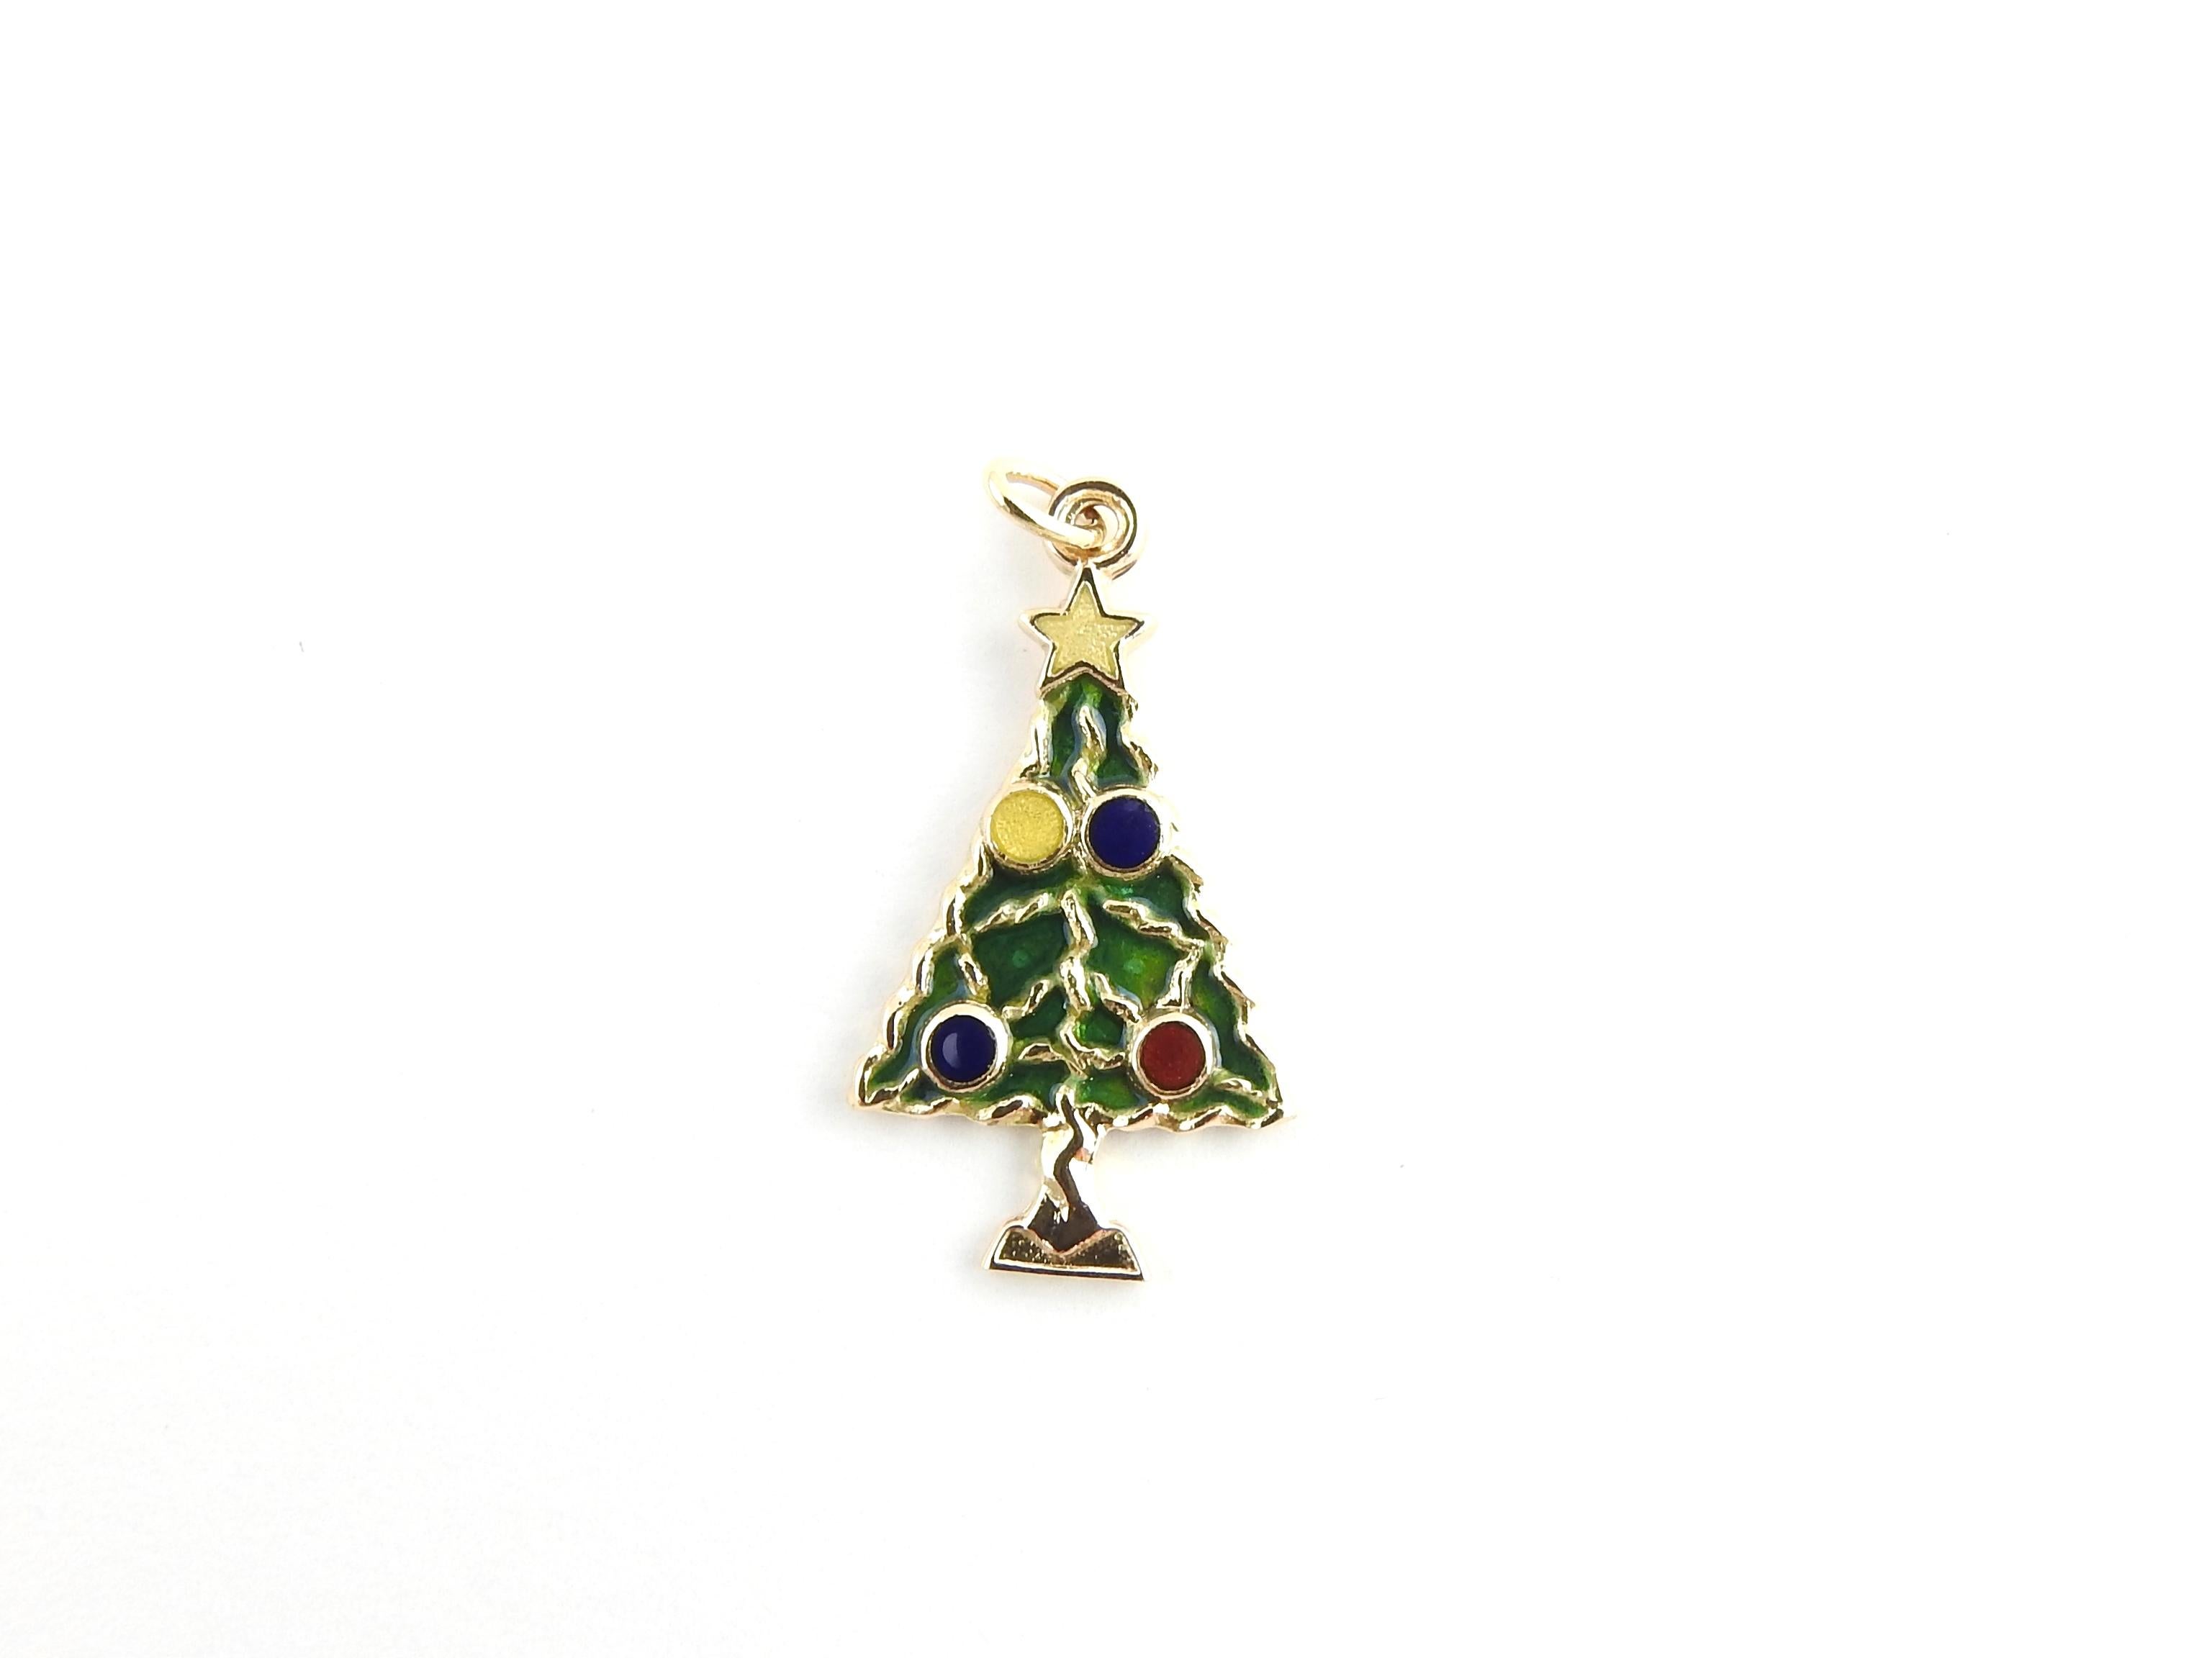 Vintage 14 Karat Yellow Gold and Enamel Christmas Tree Charm

'Tis the season!

This lovely 14K yellow gold charm features a beautifully crafted Christmas tree decorated with colorful enamel.

Size: 25 mm x 14 mm (actual charm)

Weight: 1.4 dwt.